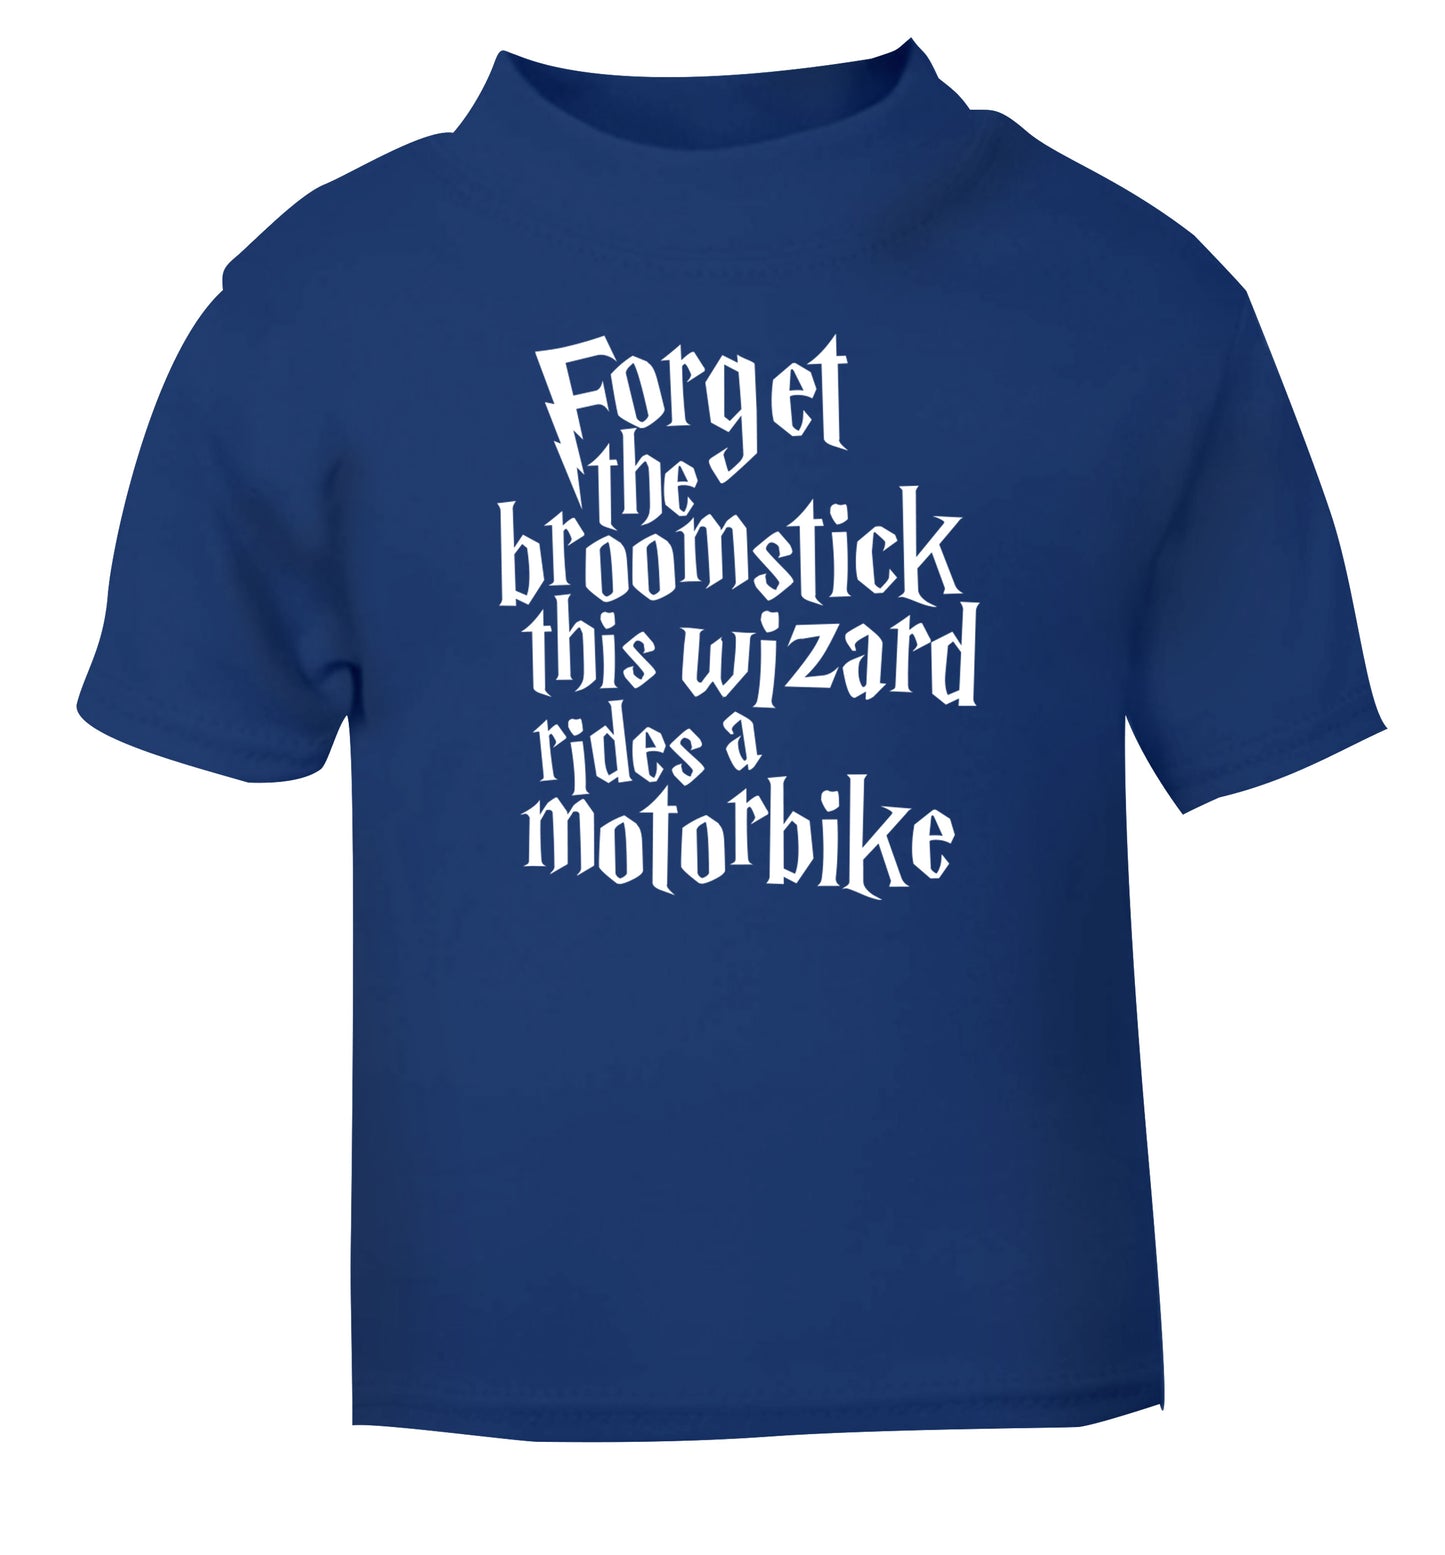 Forget the broomstick this wizard rides a motorbike blue Baby Toddler Tshirt 2 Years